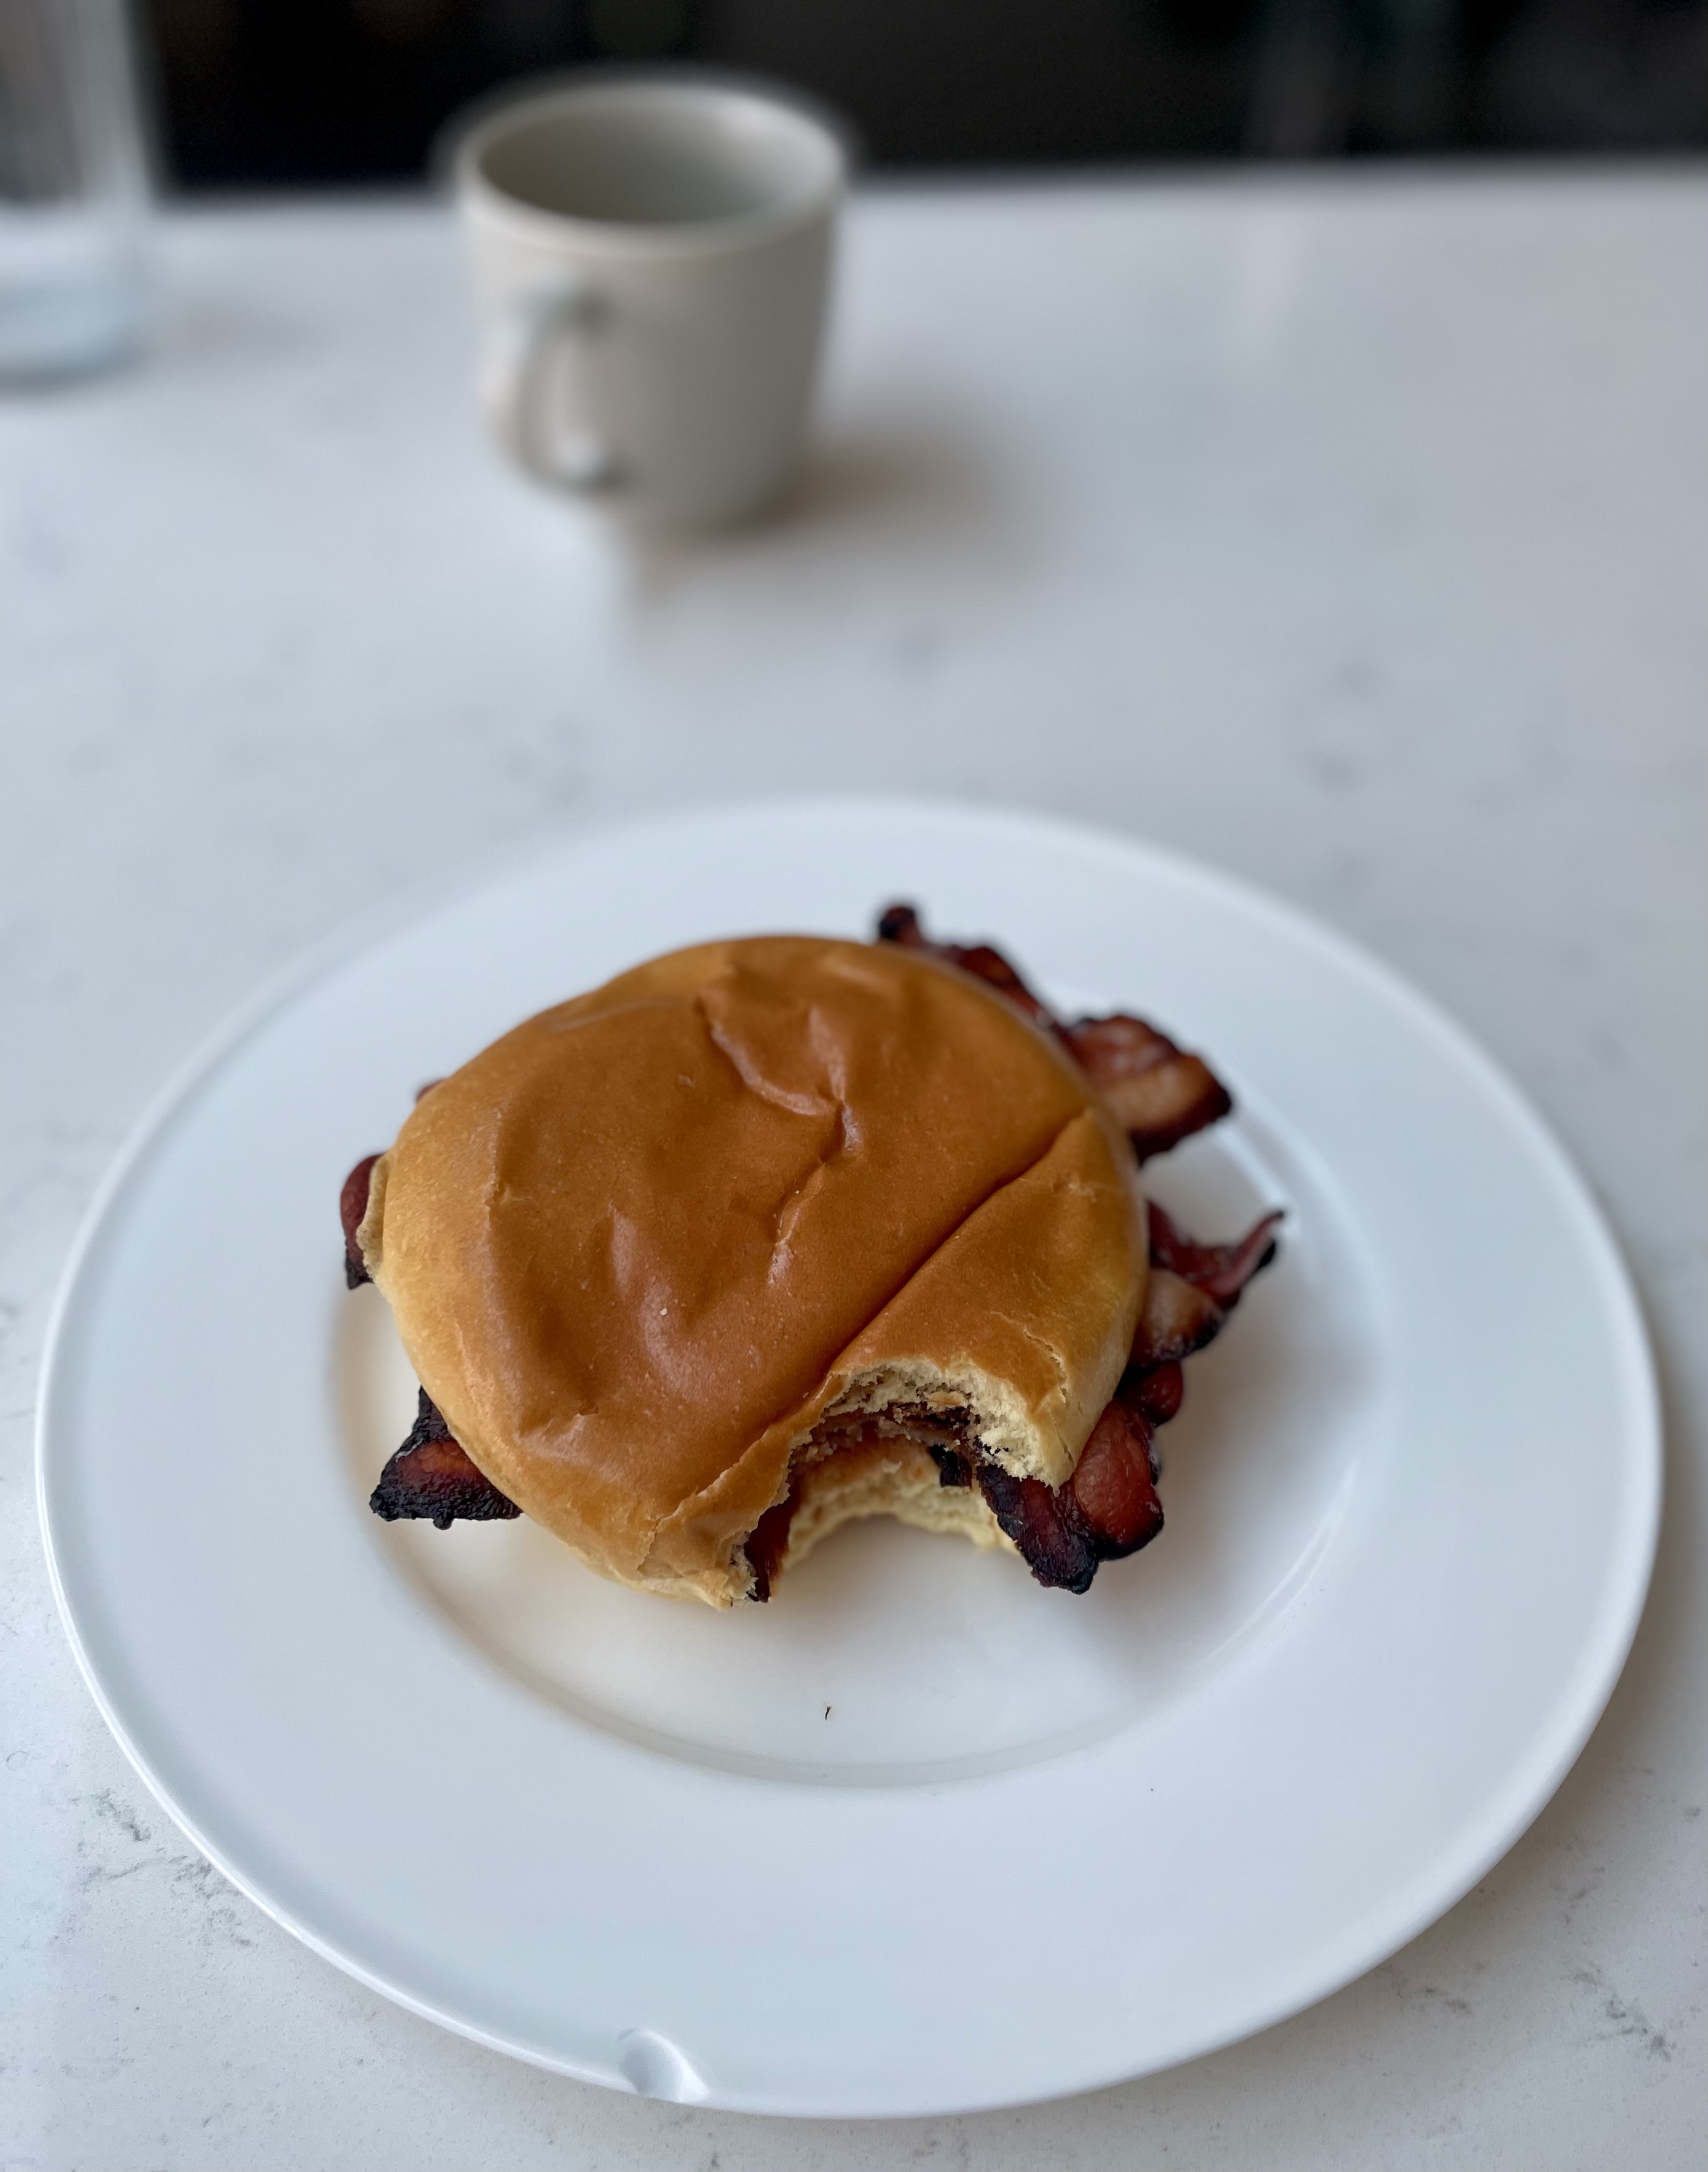 Pistonheads - The image shows a close-up of a breakfast sandwich, which appears to be a bacon sandwich, with a single strip of bacon visible. The sandwich is placed on top of a white plate and is partially wrapped in paper, suggesting it might still be warm. There's a wooden table beneath the plate, and in the background, there are blurred objects that suggest a casual dining environment. On the table to the left, there's a coffee cup with a handle, indicating that the meal is accompanied by a hot beverage. The overall ambiance of the image suggests a relaxed and simple morning routine.